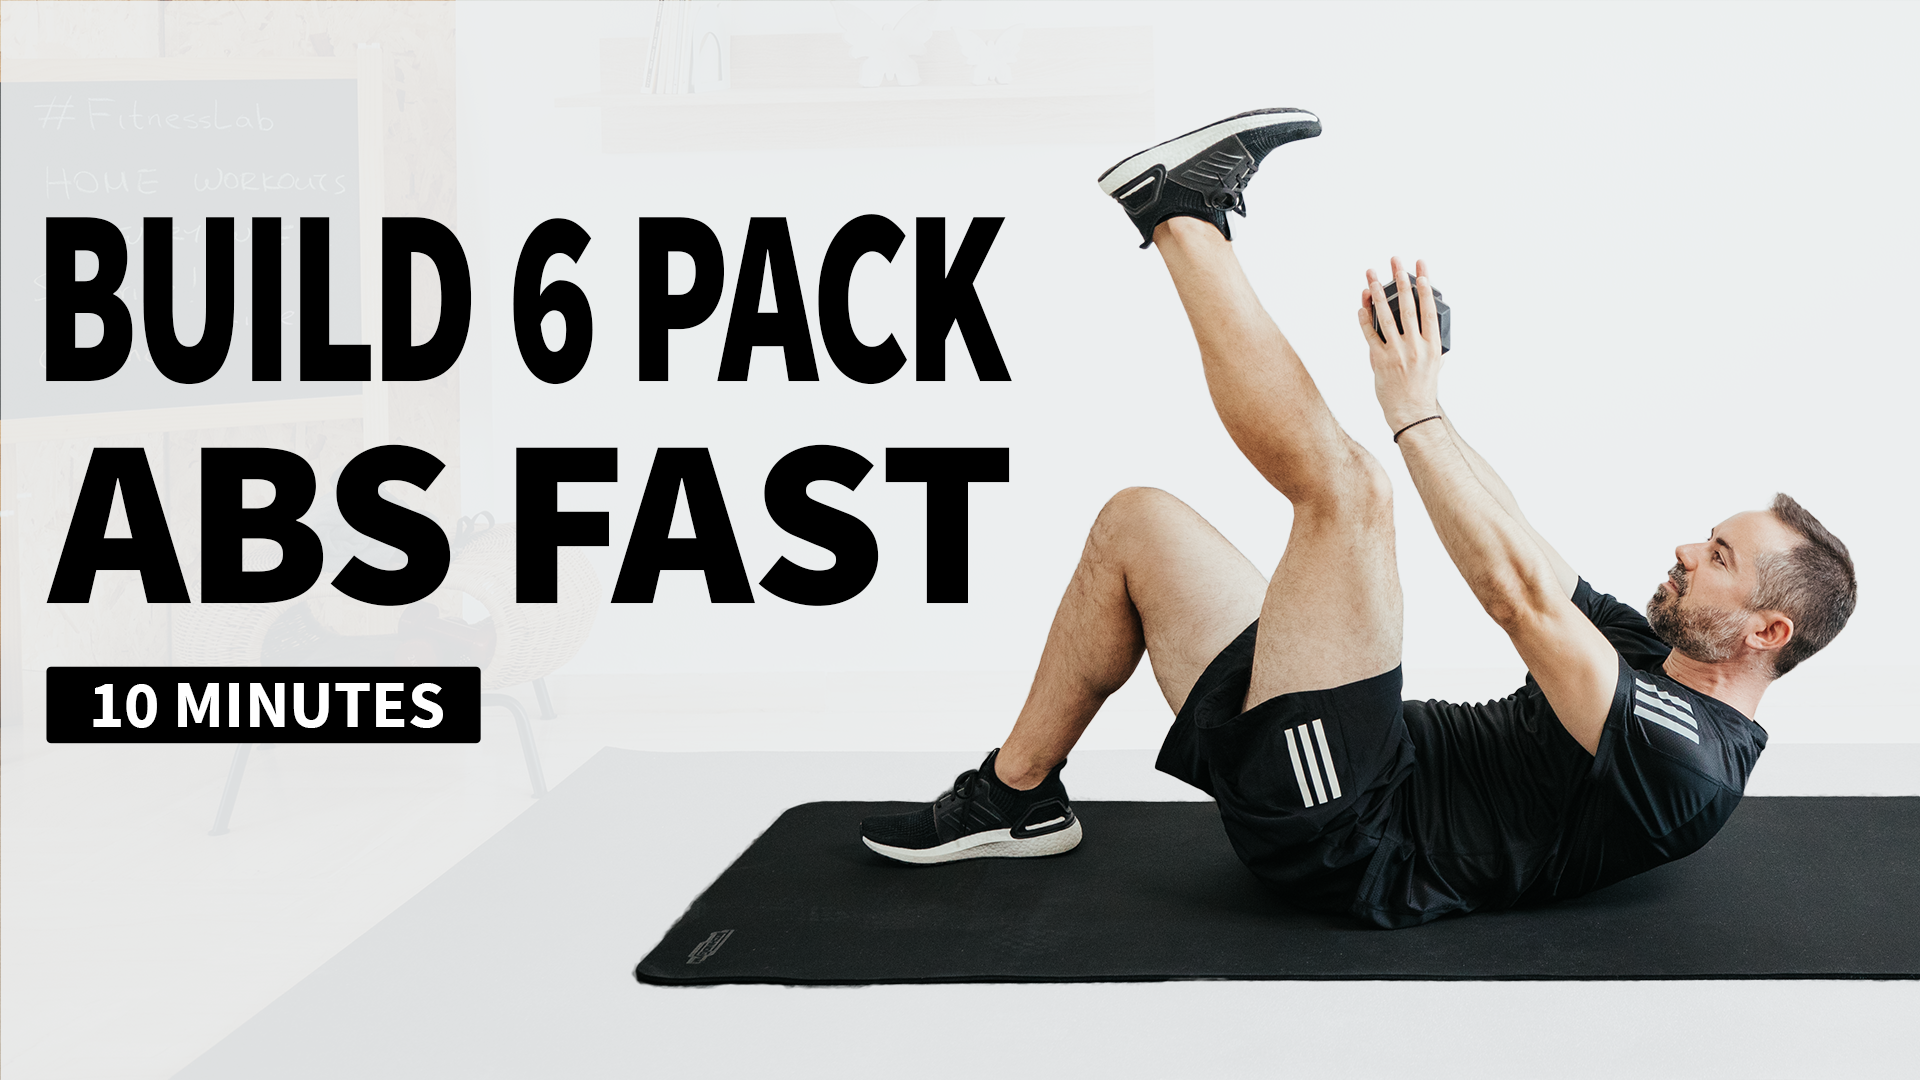 Build 6 Pack ABS Fast